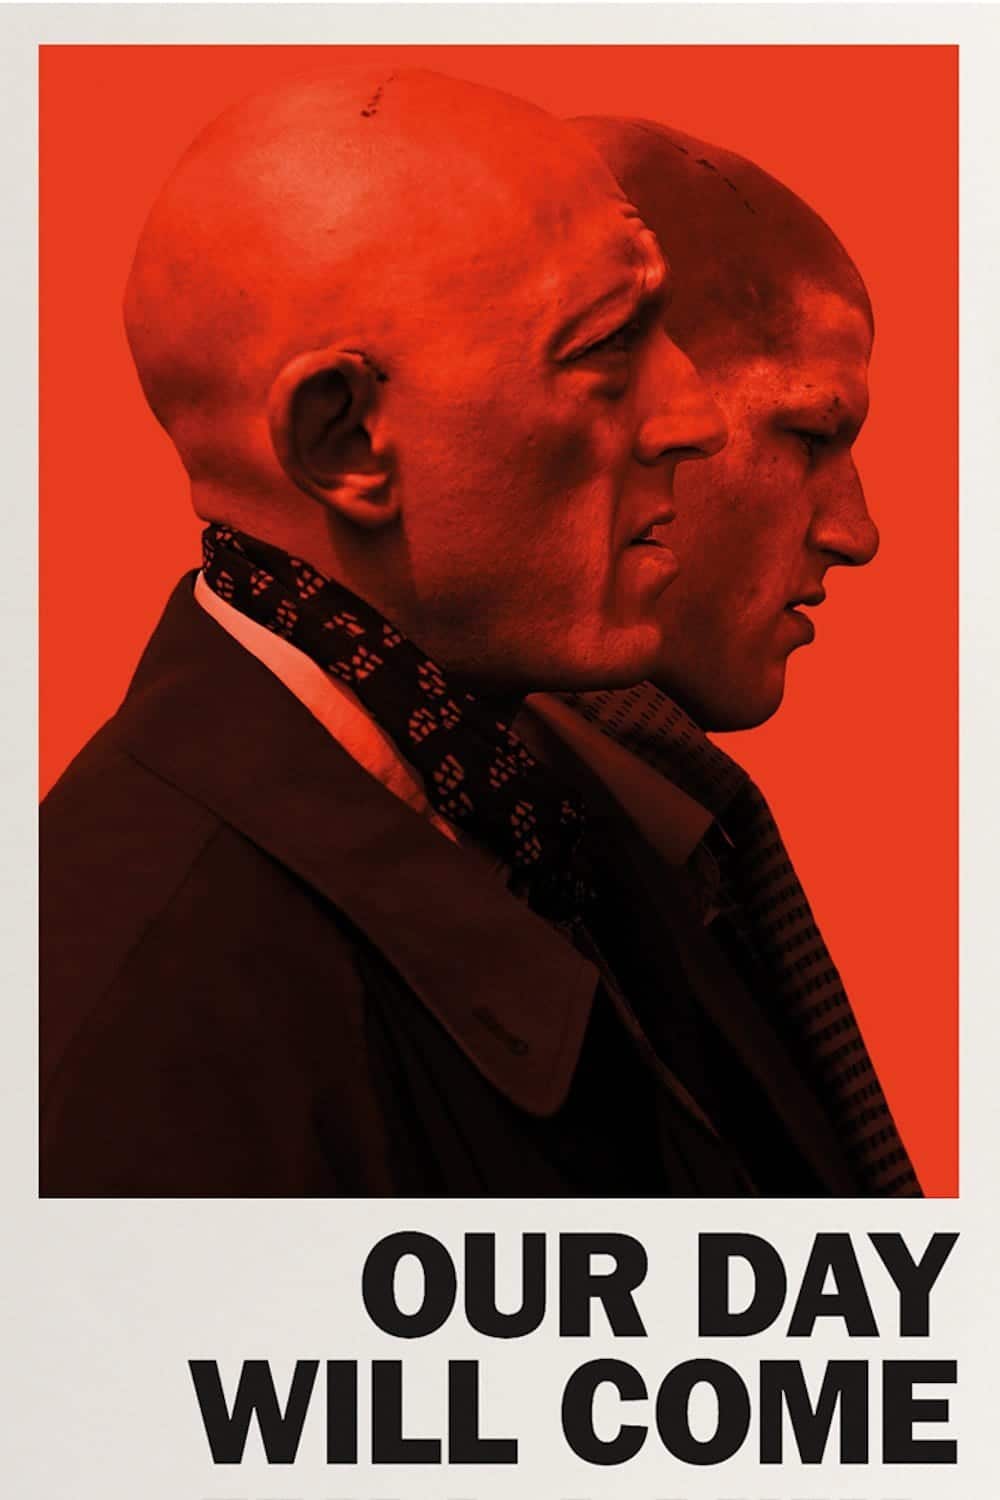 Plakat von "Our Day Will Come"